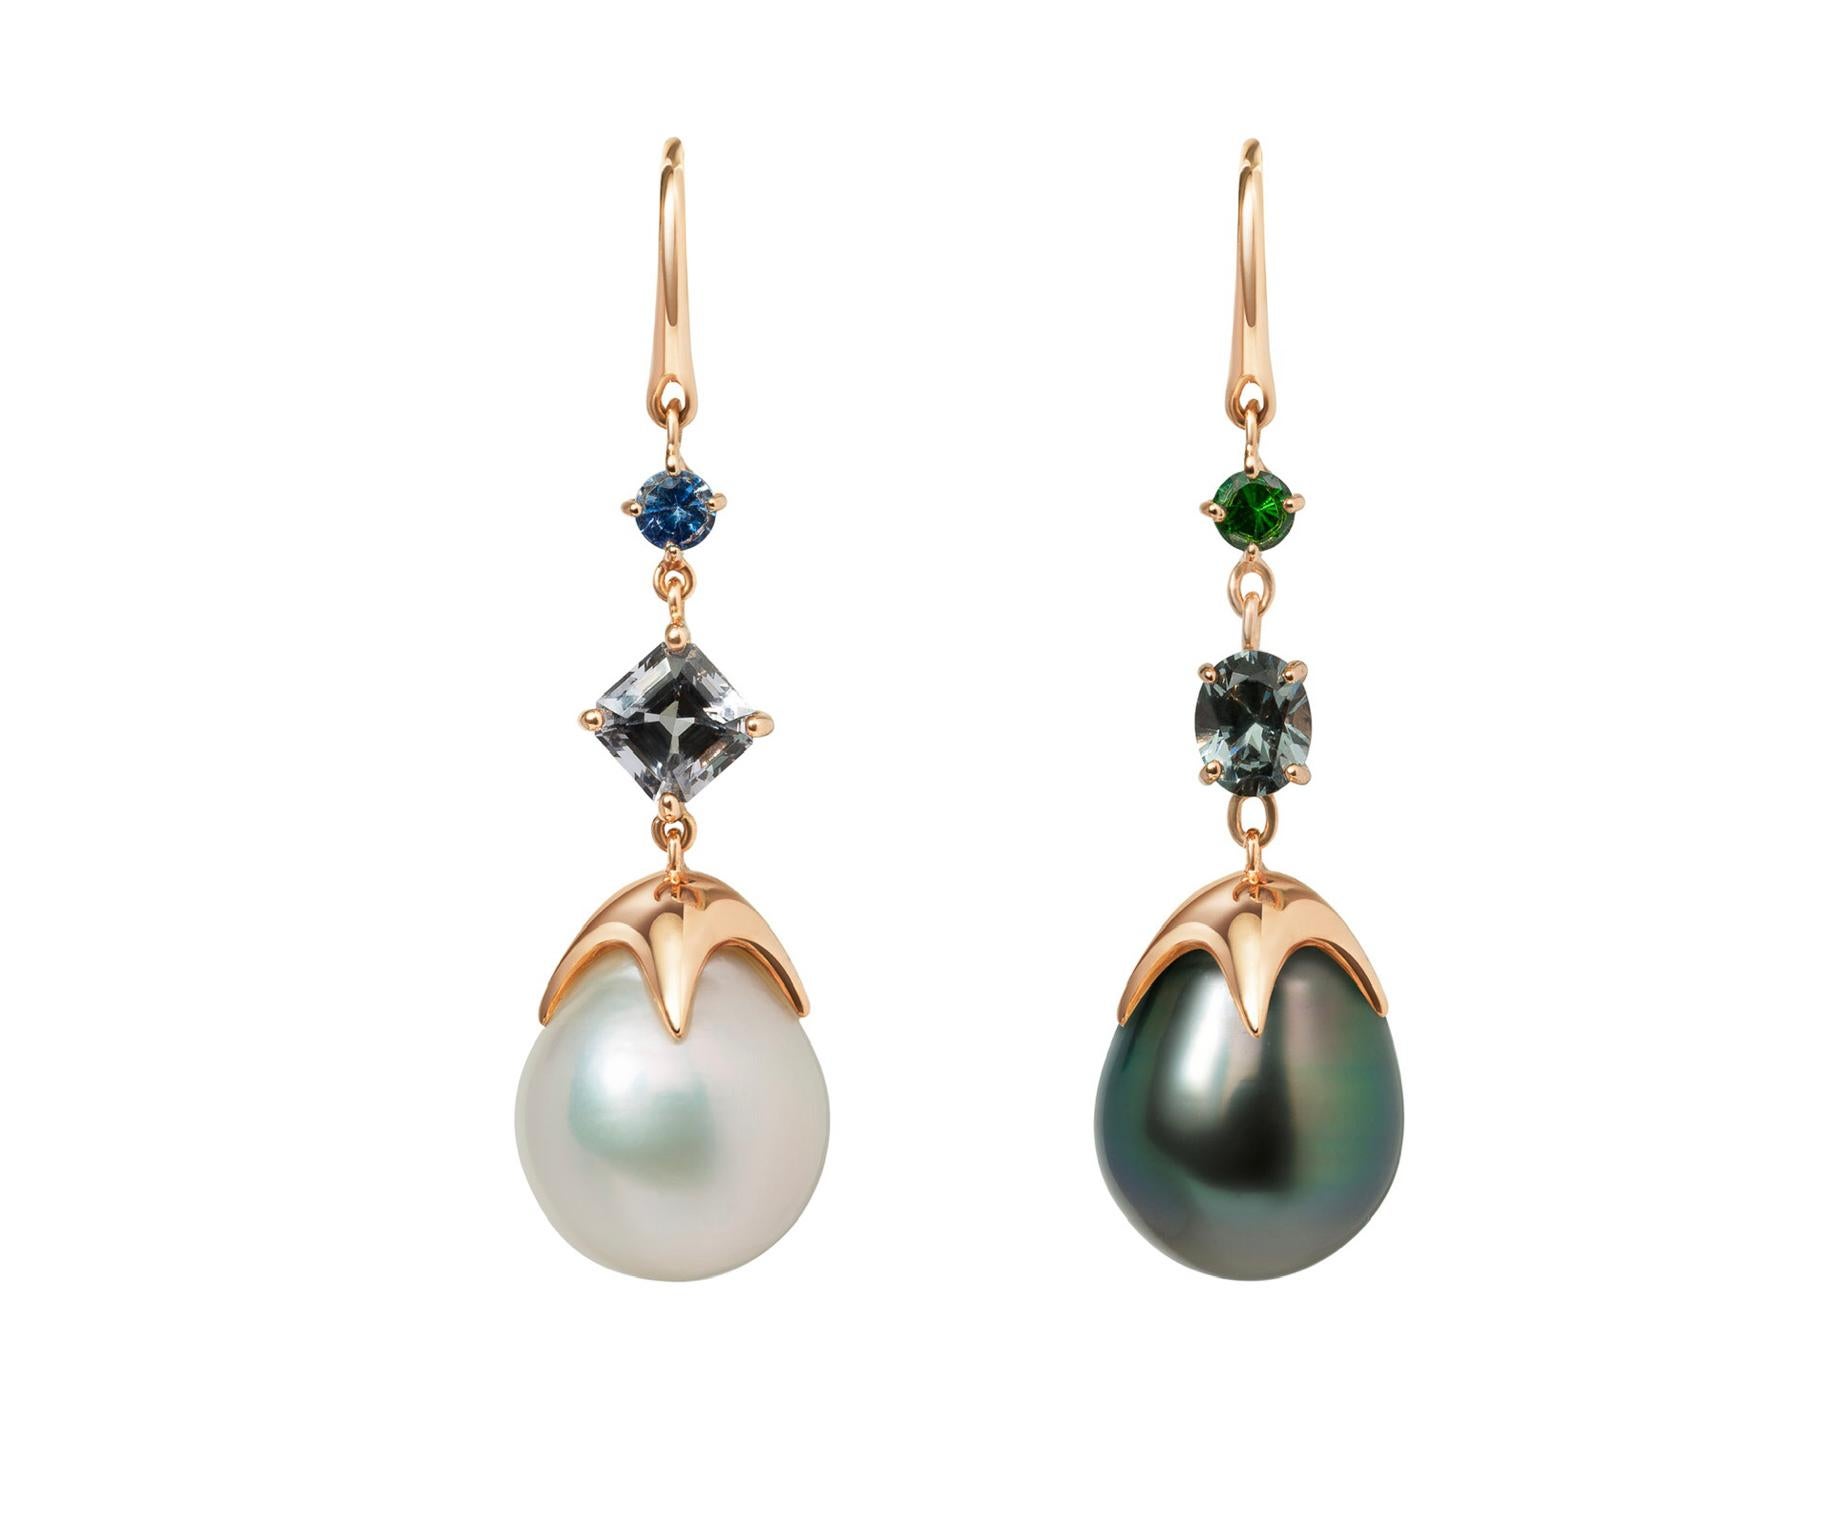 Soraya 18 Karat Gold, Grey Spinels, Sapphire, Tsavorite and Pearls Earrings In New Condition For Sale In Geneve, Genf